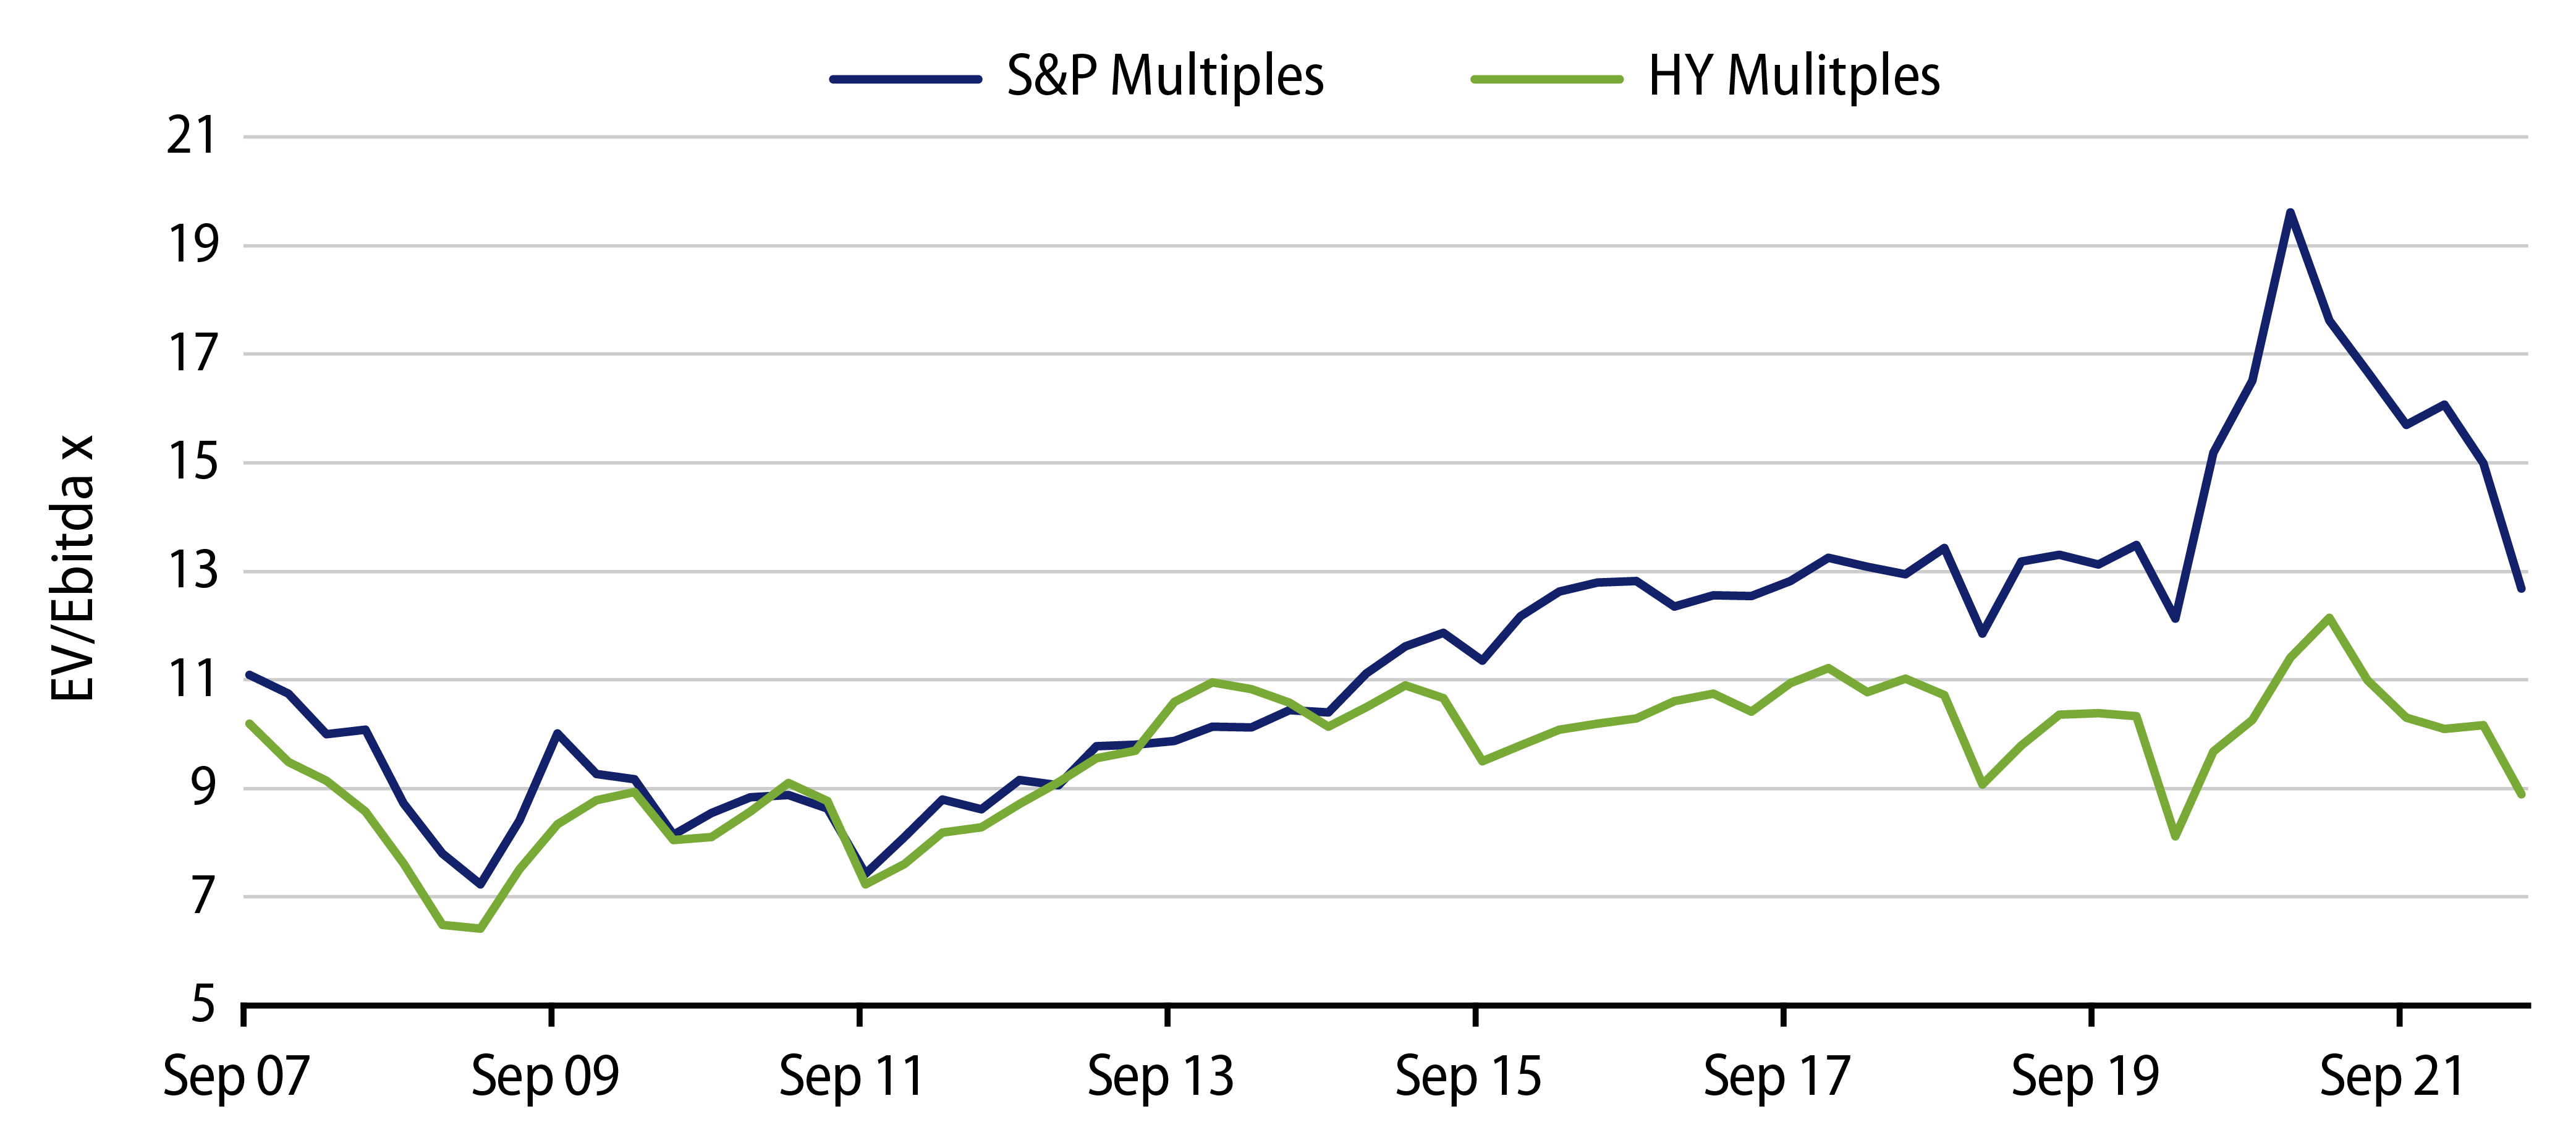 Are High-Yield Credit Multiples Less Vulnerable?